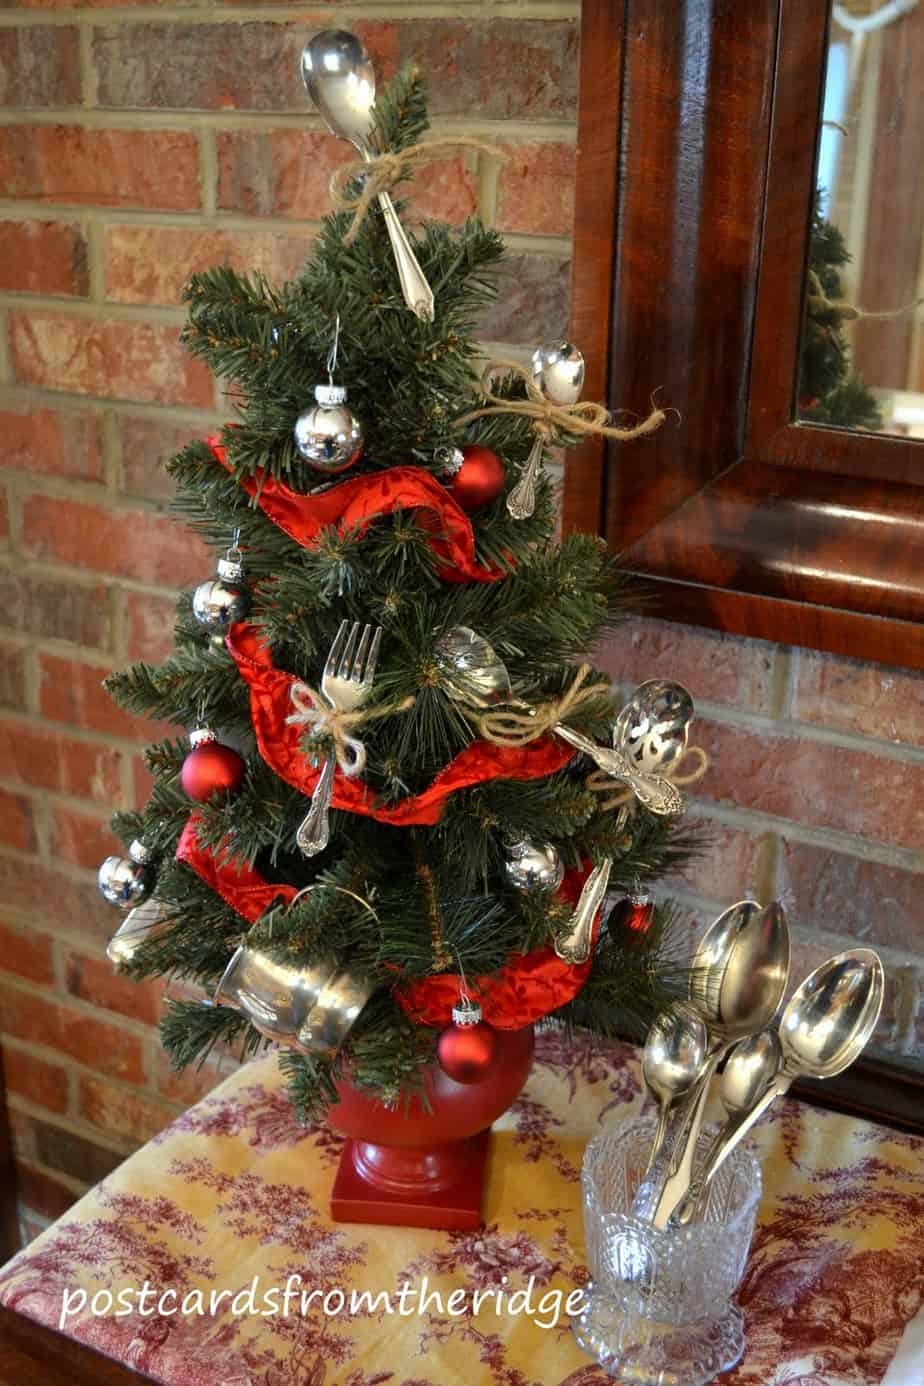 small tree with baby silverware attached